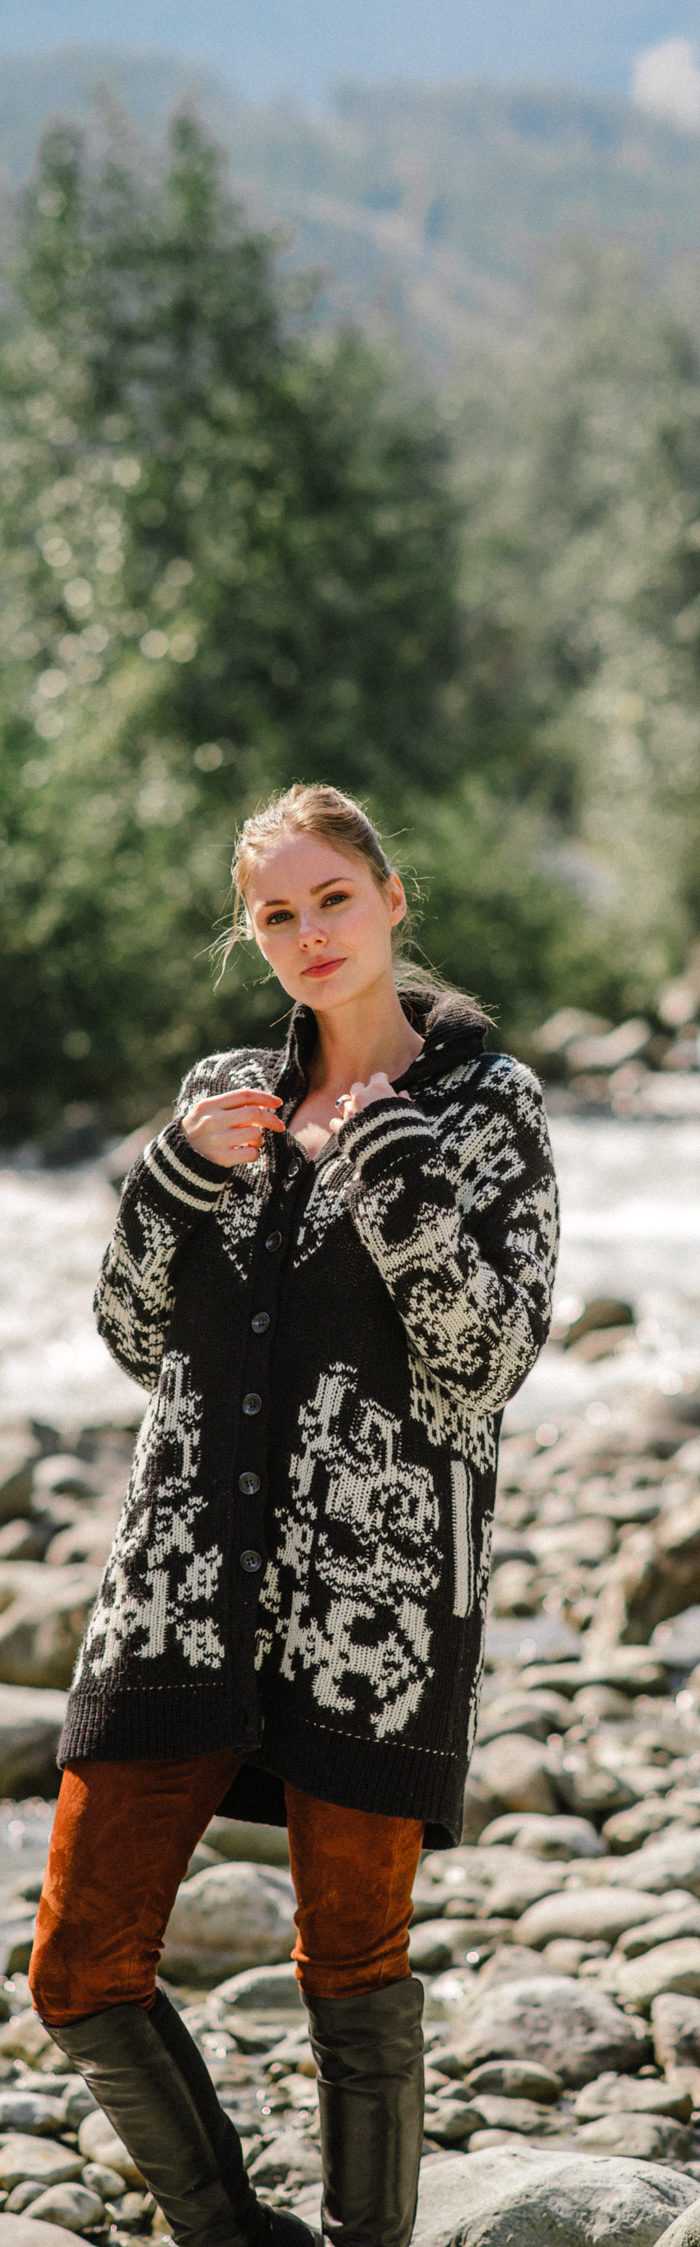 Alyssa Campanella of The A List shares her Whistler City Guide wearing RED Valentino Intarsia cardigan and Joseph Suede pants at Whistler village